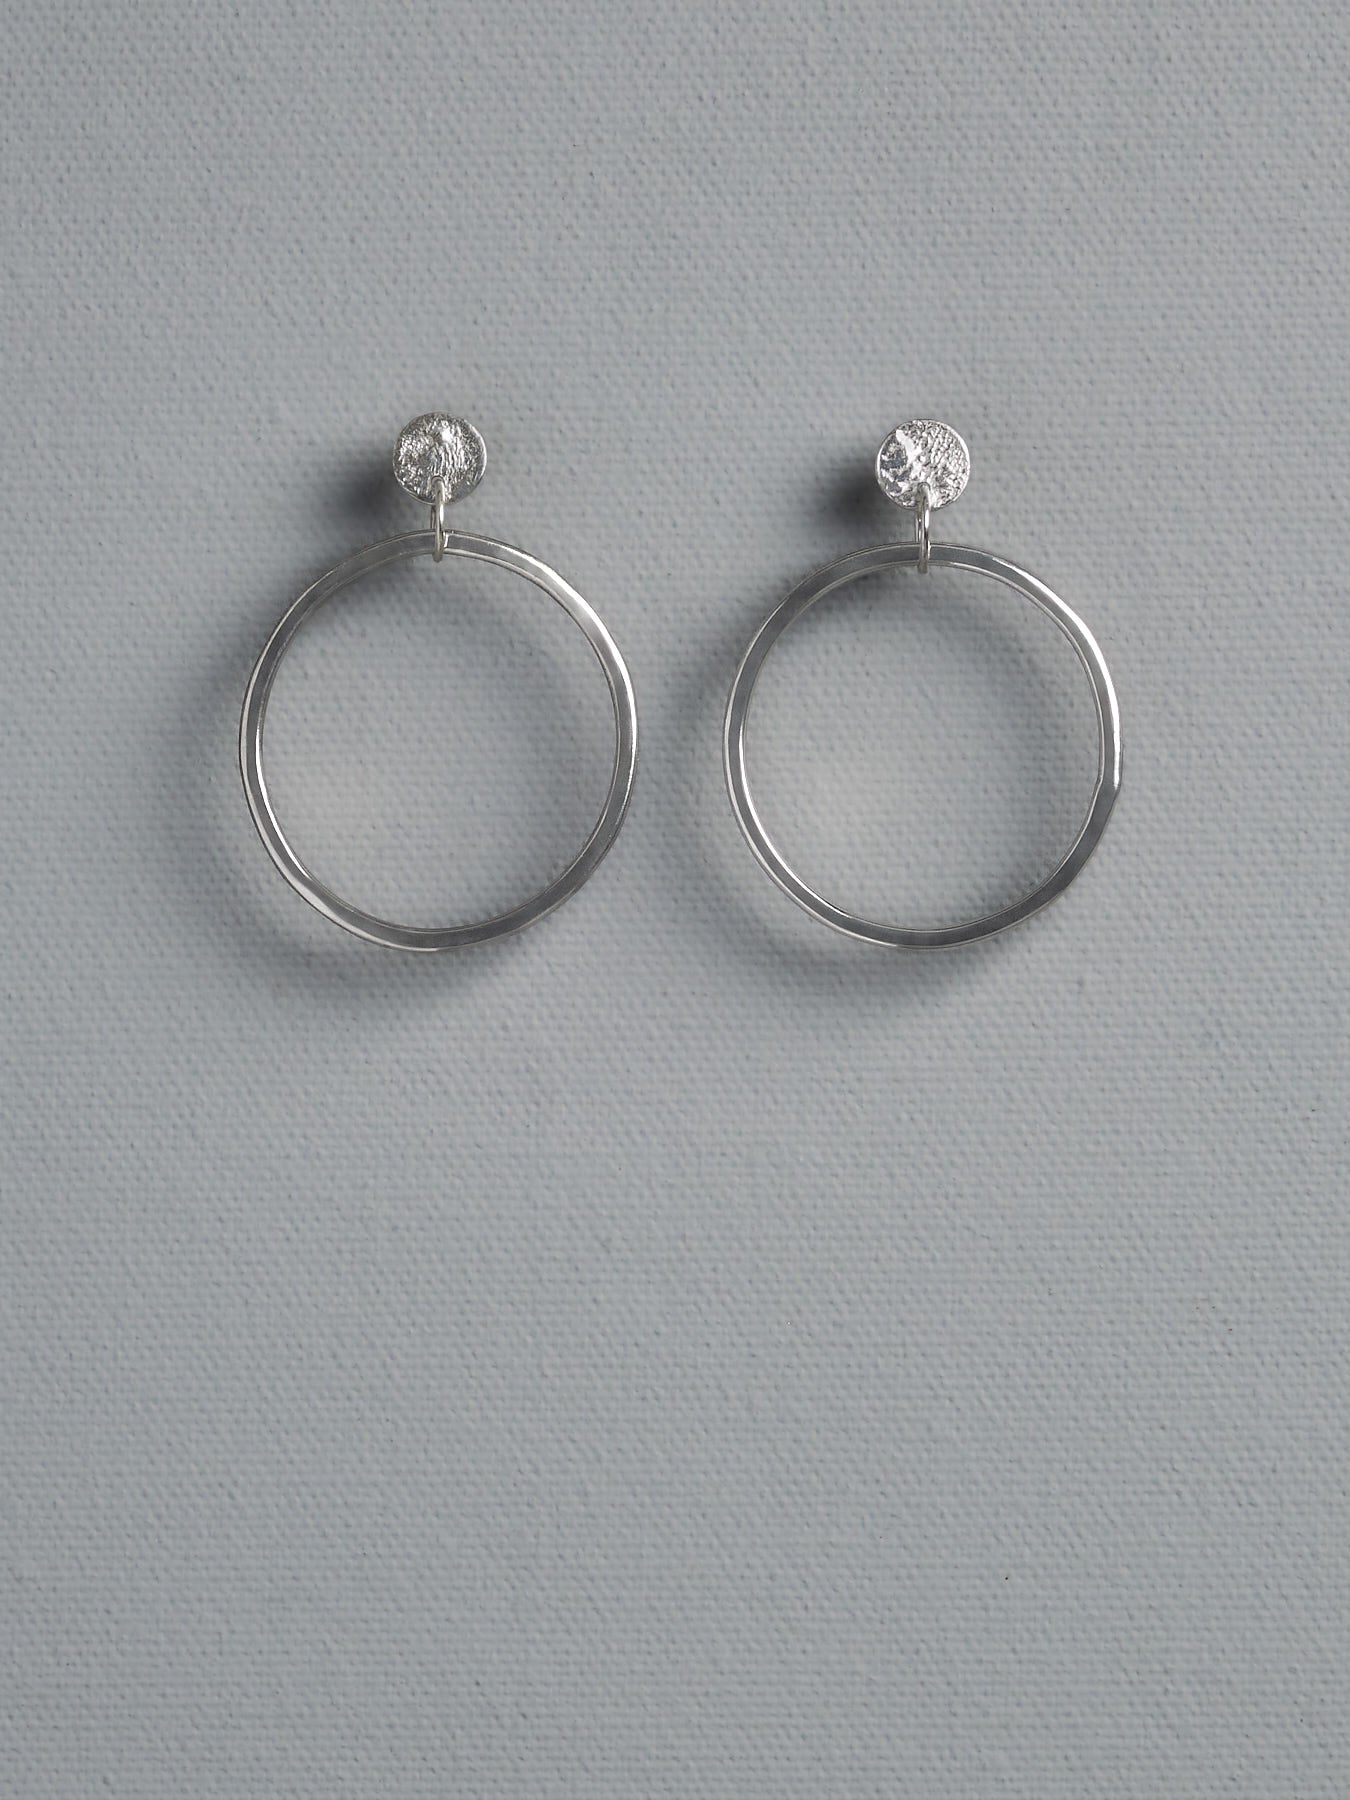 A pair of Ripple Loop Earrings by Amy Iddles Jeweller with a diamond in the middle.